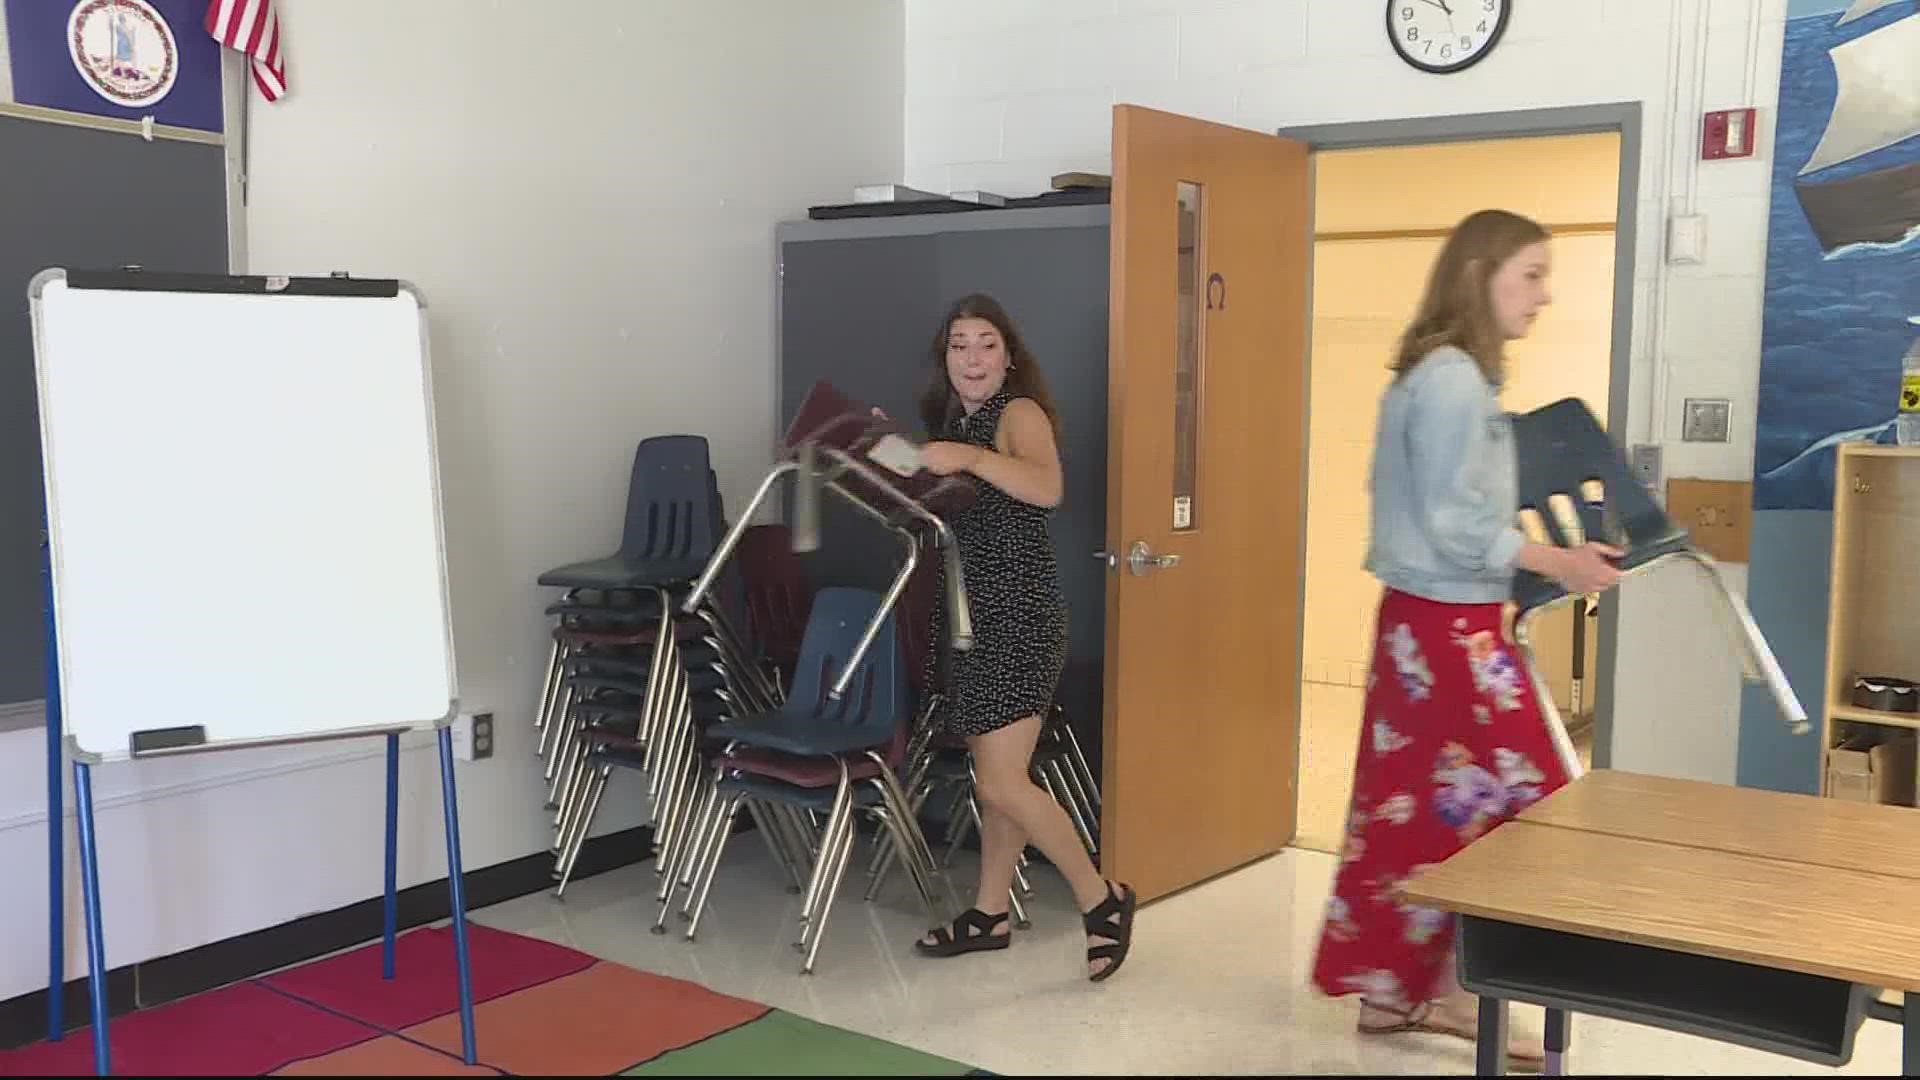 While nationwide teacher shortages are affecting many schools across the state, new teacher hires will help Fairfax County Public Schools start the year on Aug. 22.